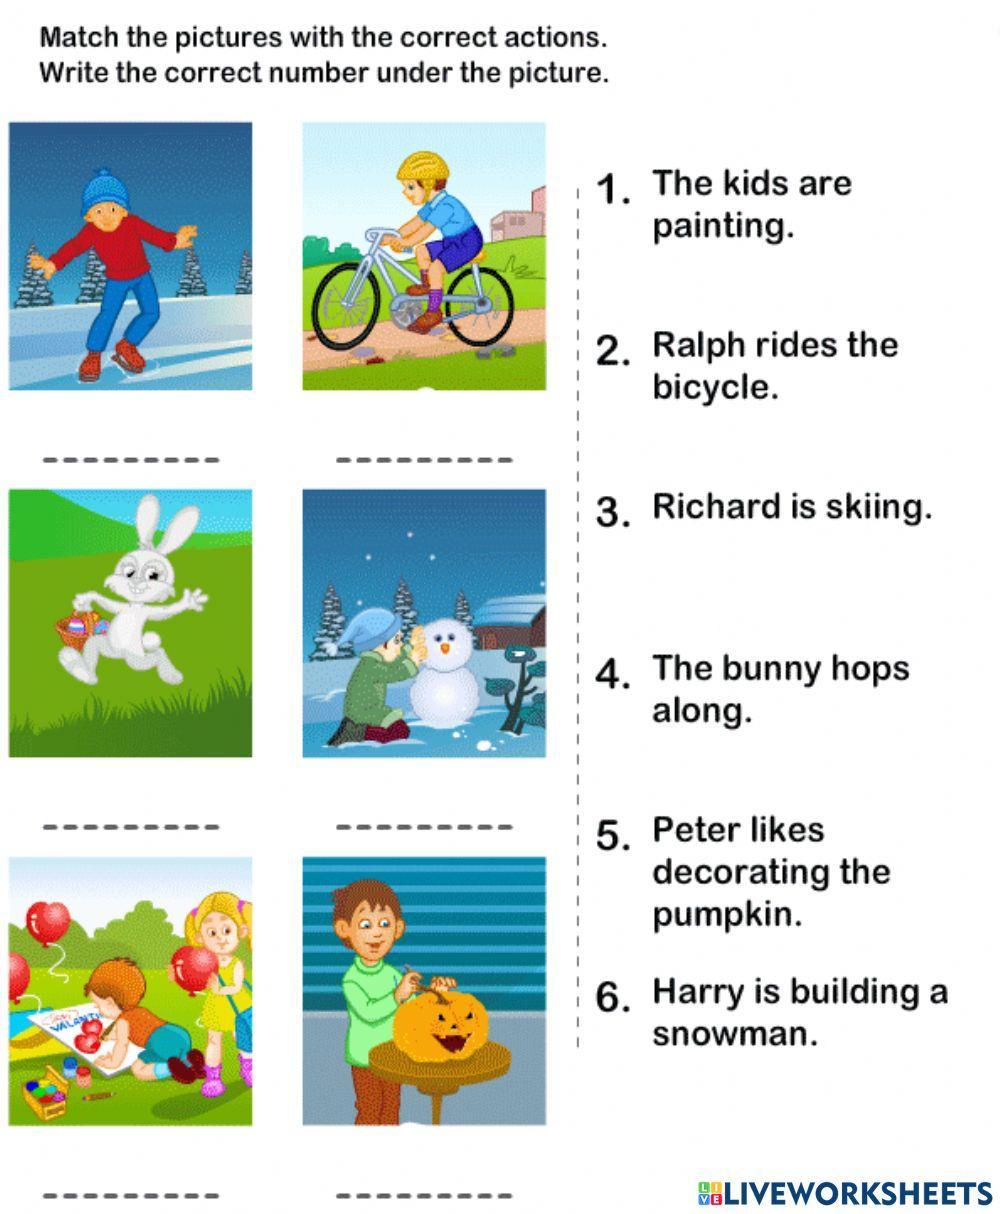 Worksheets actions. Задания Actions for Kids. Глаголы движения на английском Worksheet. Actions Worksheets. Action verbs exercises for Kids.